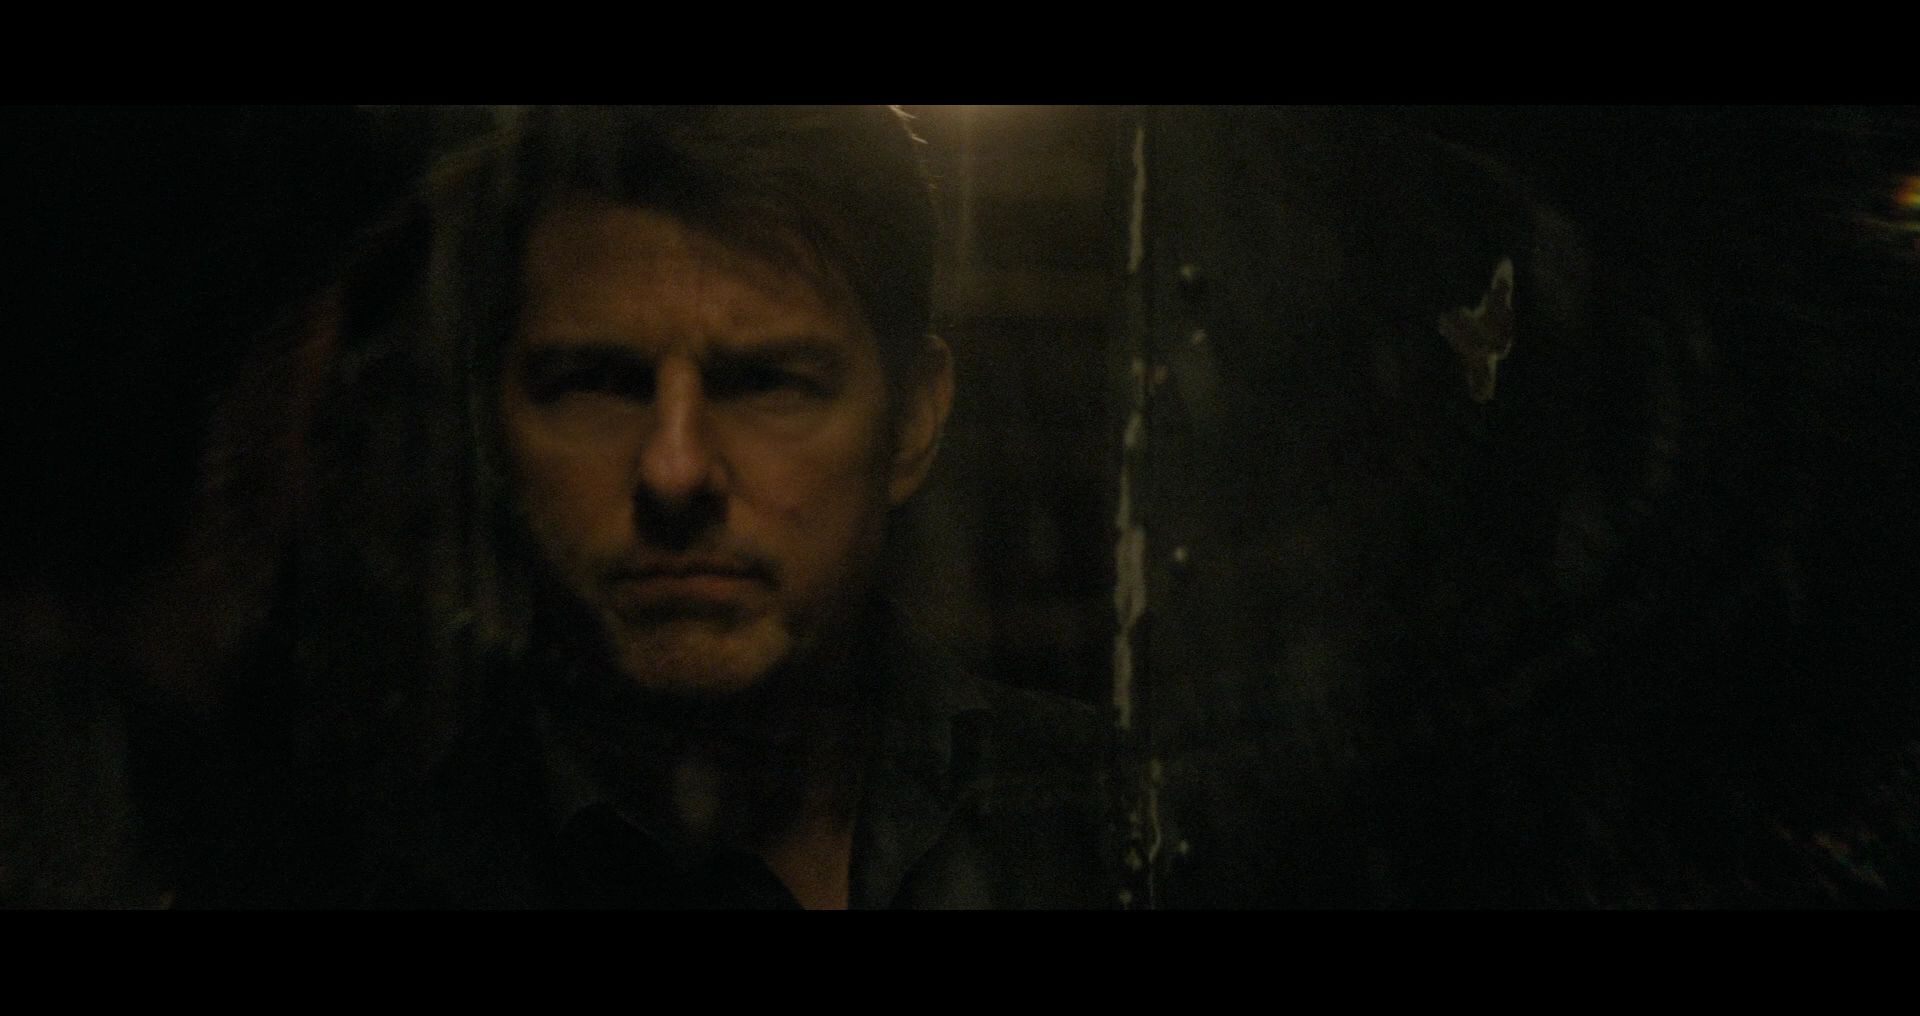 Mission-Impossible-Fallout-0081.jpg